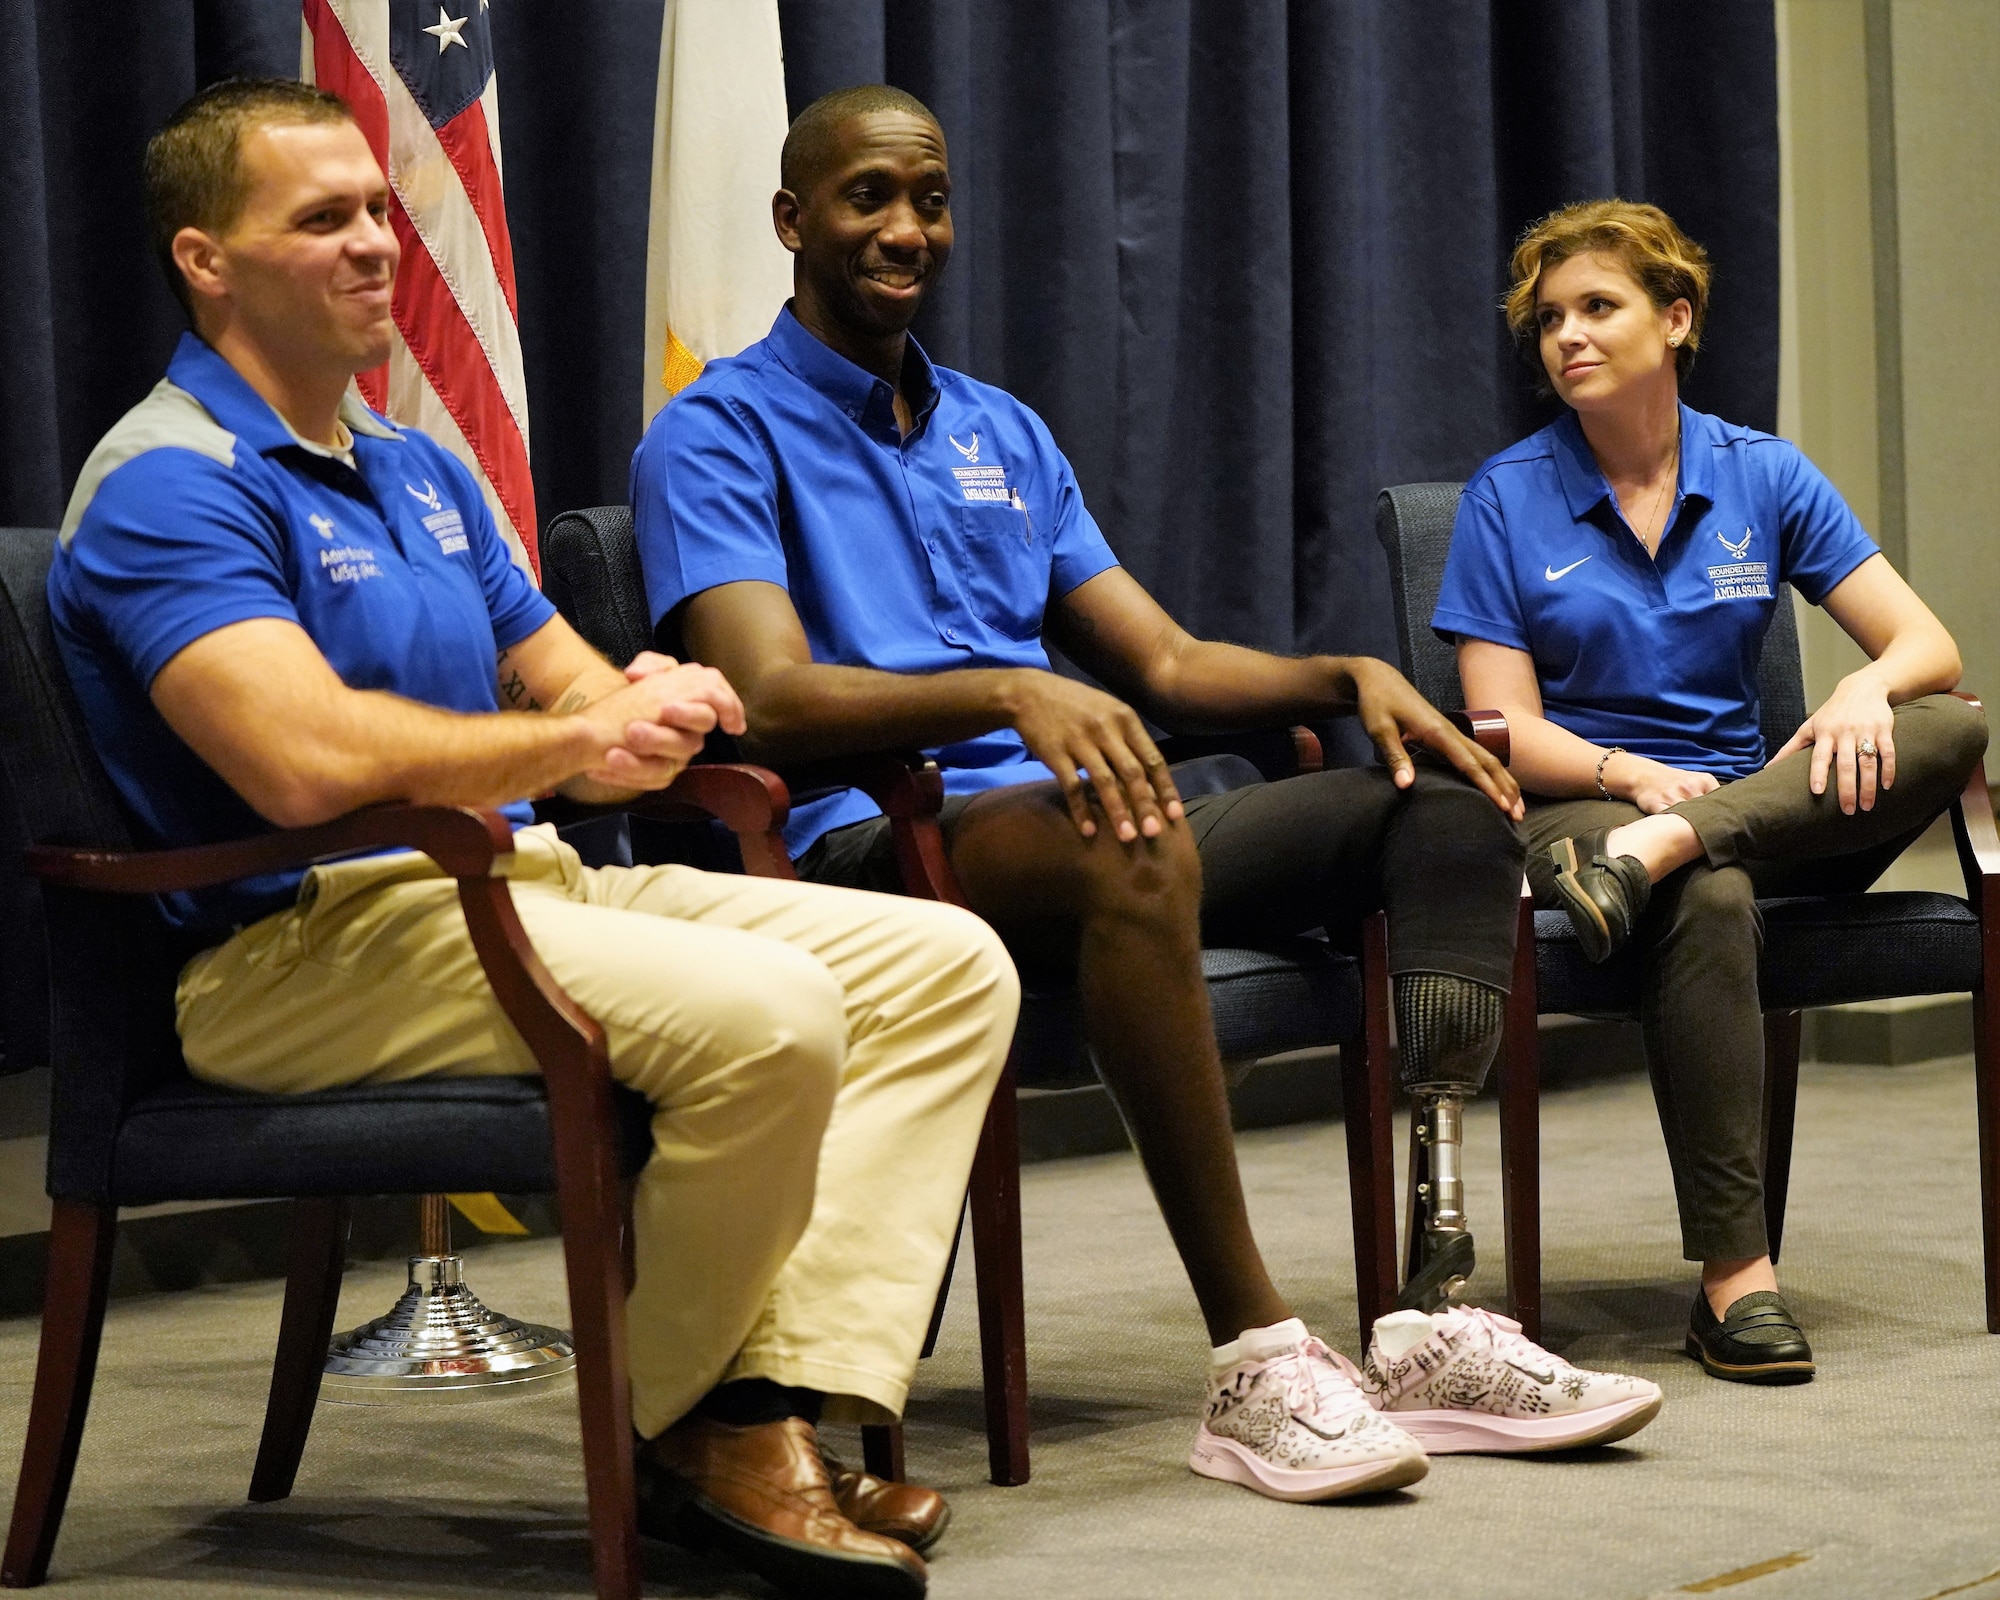 Three Air Force Wounded Warrior Program Ambassadors (pictured left to right), Master Sgt. (Ret.) Adam Boccher, Staff Sgt. Kevin Greene, and Maj. (Ret.) Emily Elmore, discuss their unique experiences on the road to recovery and resiliency during an event conducted at U.S. Transportation Command, Aug. 21.